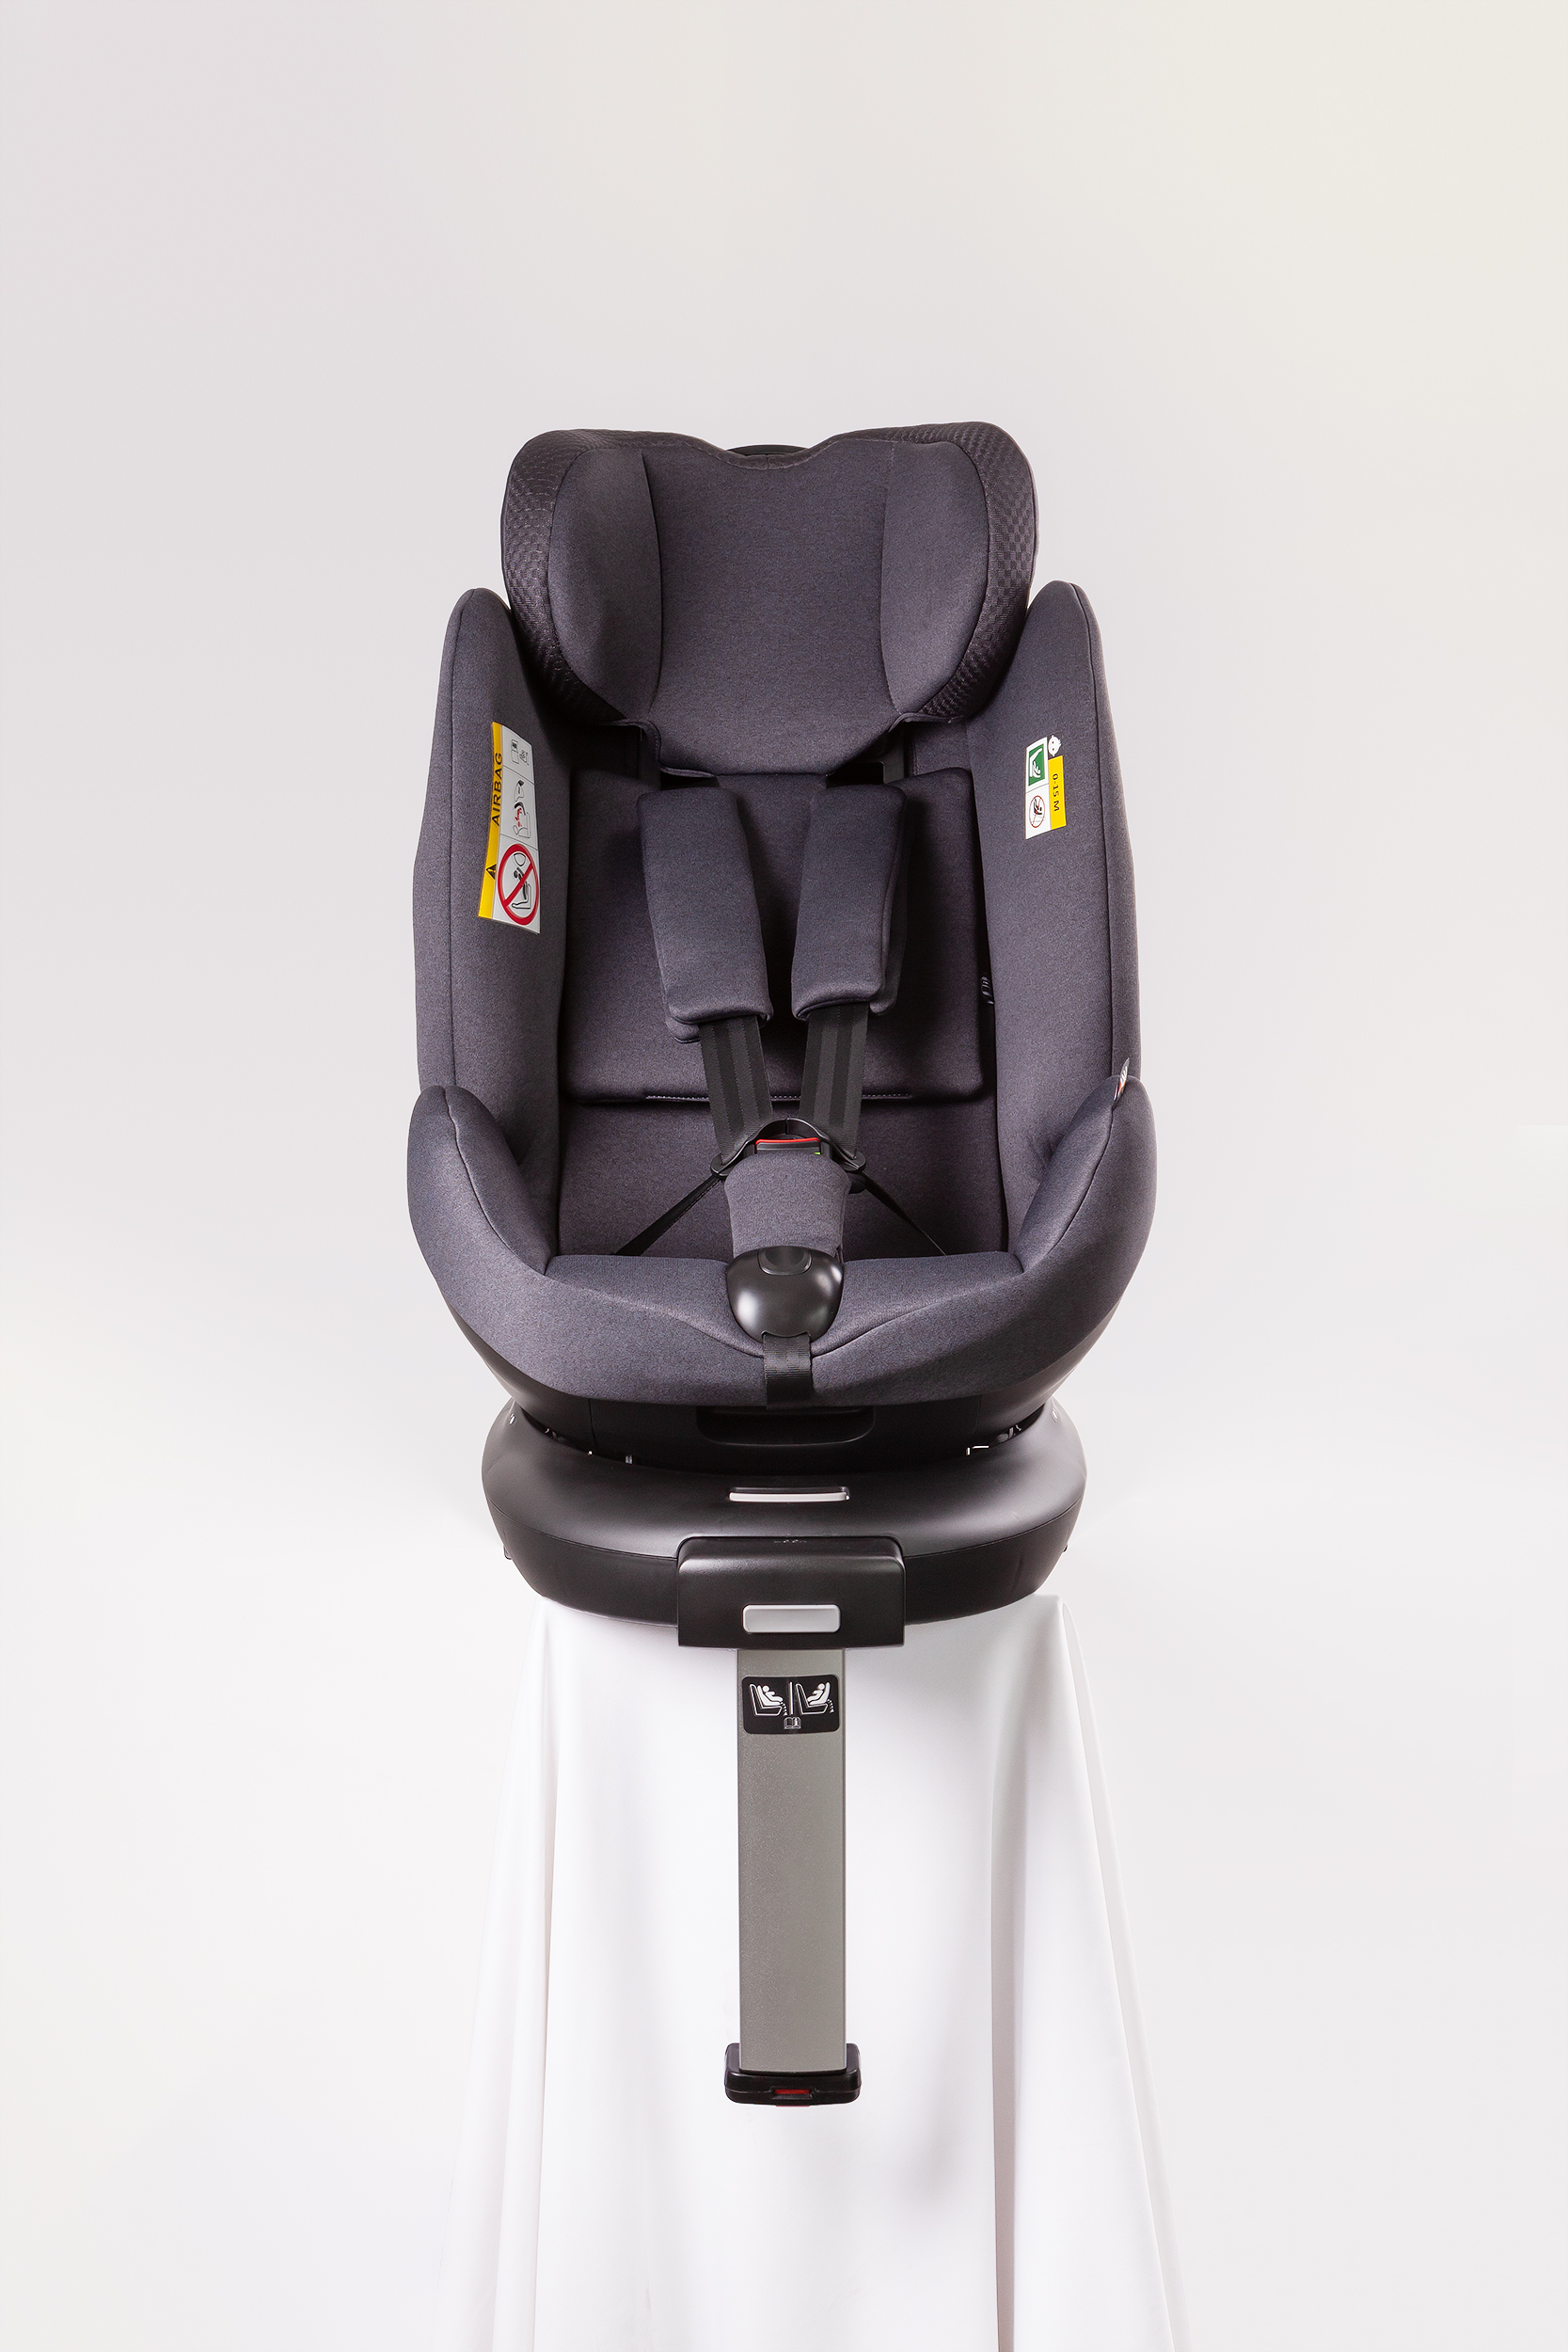 Europe Standard 360 Degree Rotation Child Car Seat for travel